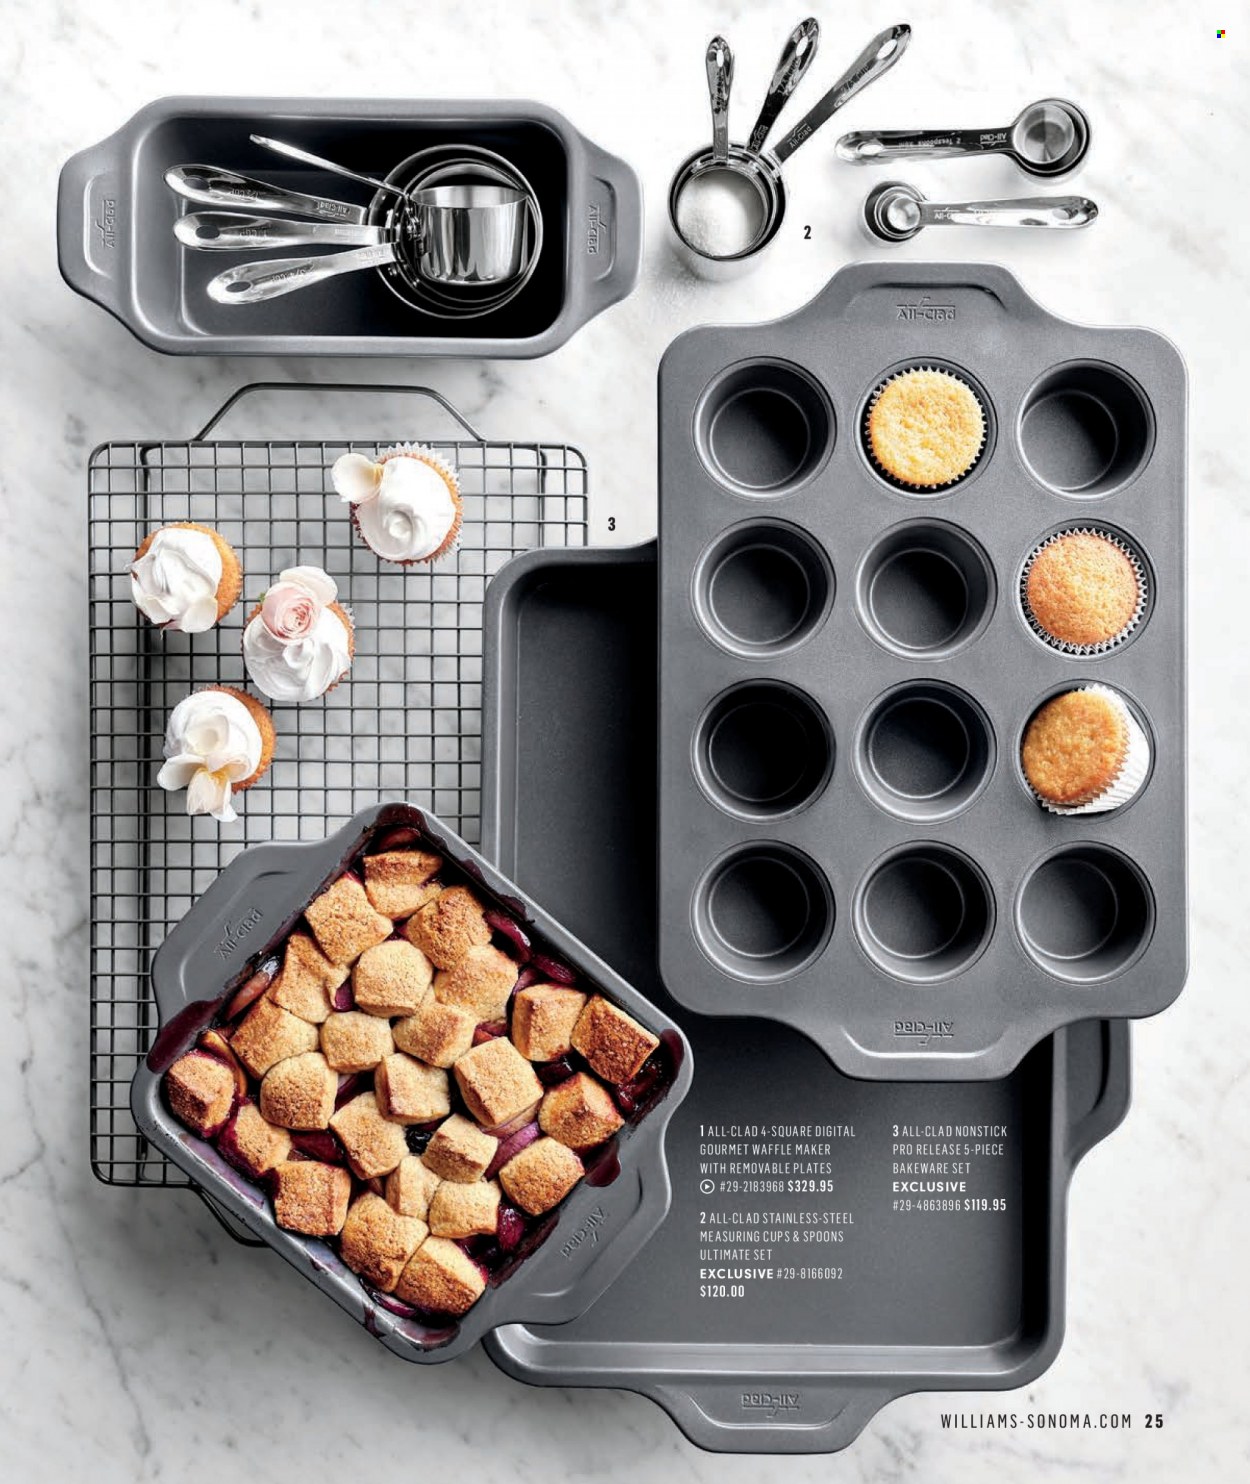 thumbnail - Williams-Sonoma Flyer - Sales products - spoon, plate, cup, bakeware, waffle maker. Page 25.